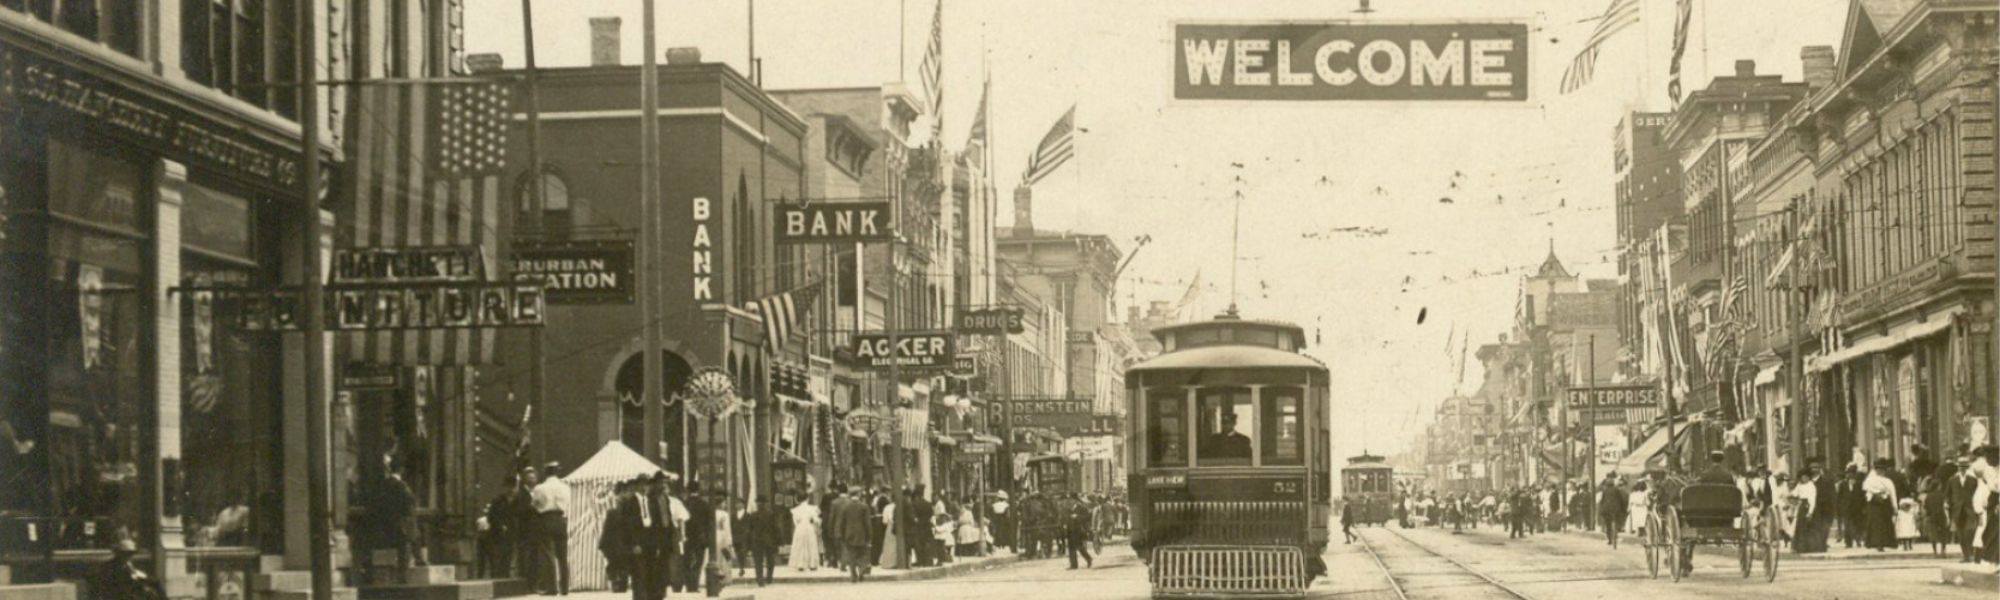 Black and white photo of downtown scene with pedestrians, carriages, and streetcars